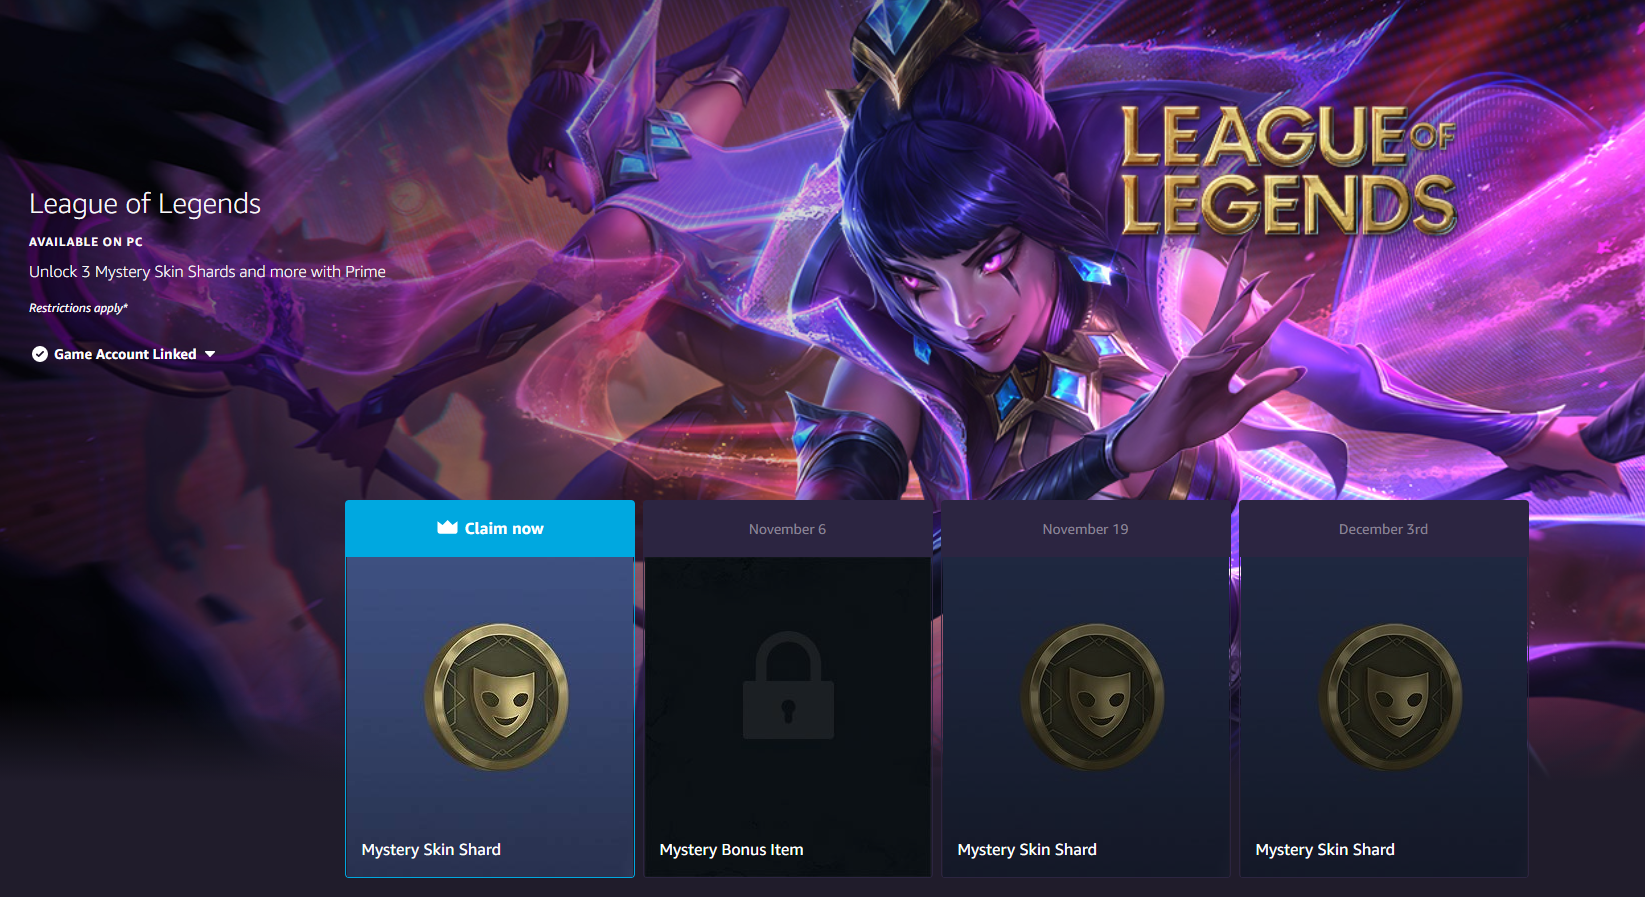 Twitch Prime members: Get Monthly Rift Rewards in League of Legends